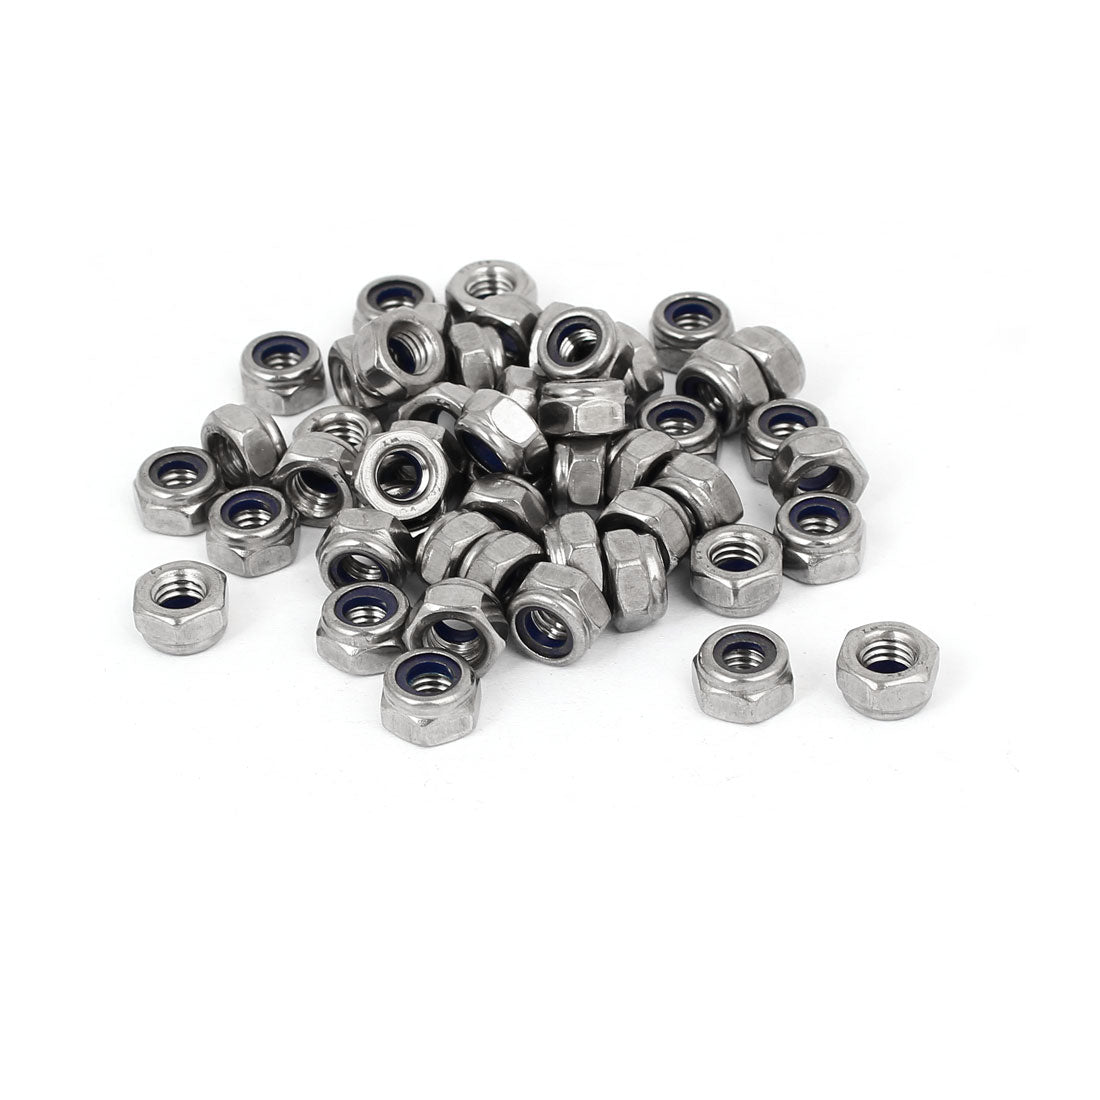 uxcell Uxcell M6 x 1mm 304 Stainless Steel Nylon Insert Hex Lock Locking Nut 50PCS